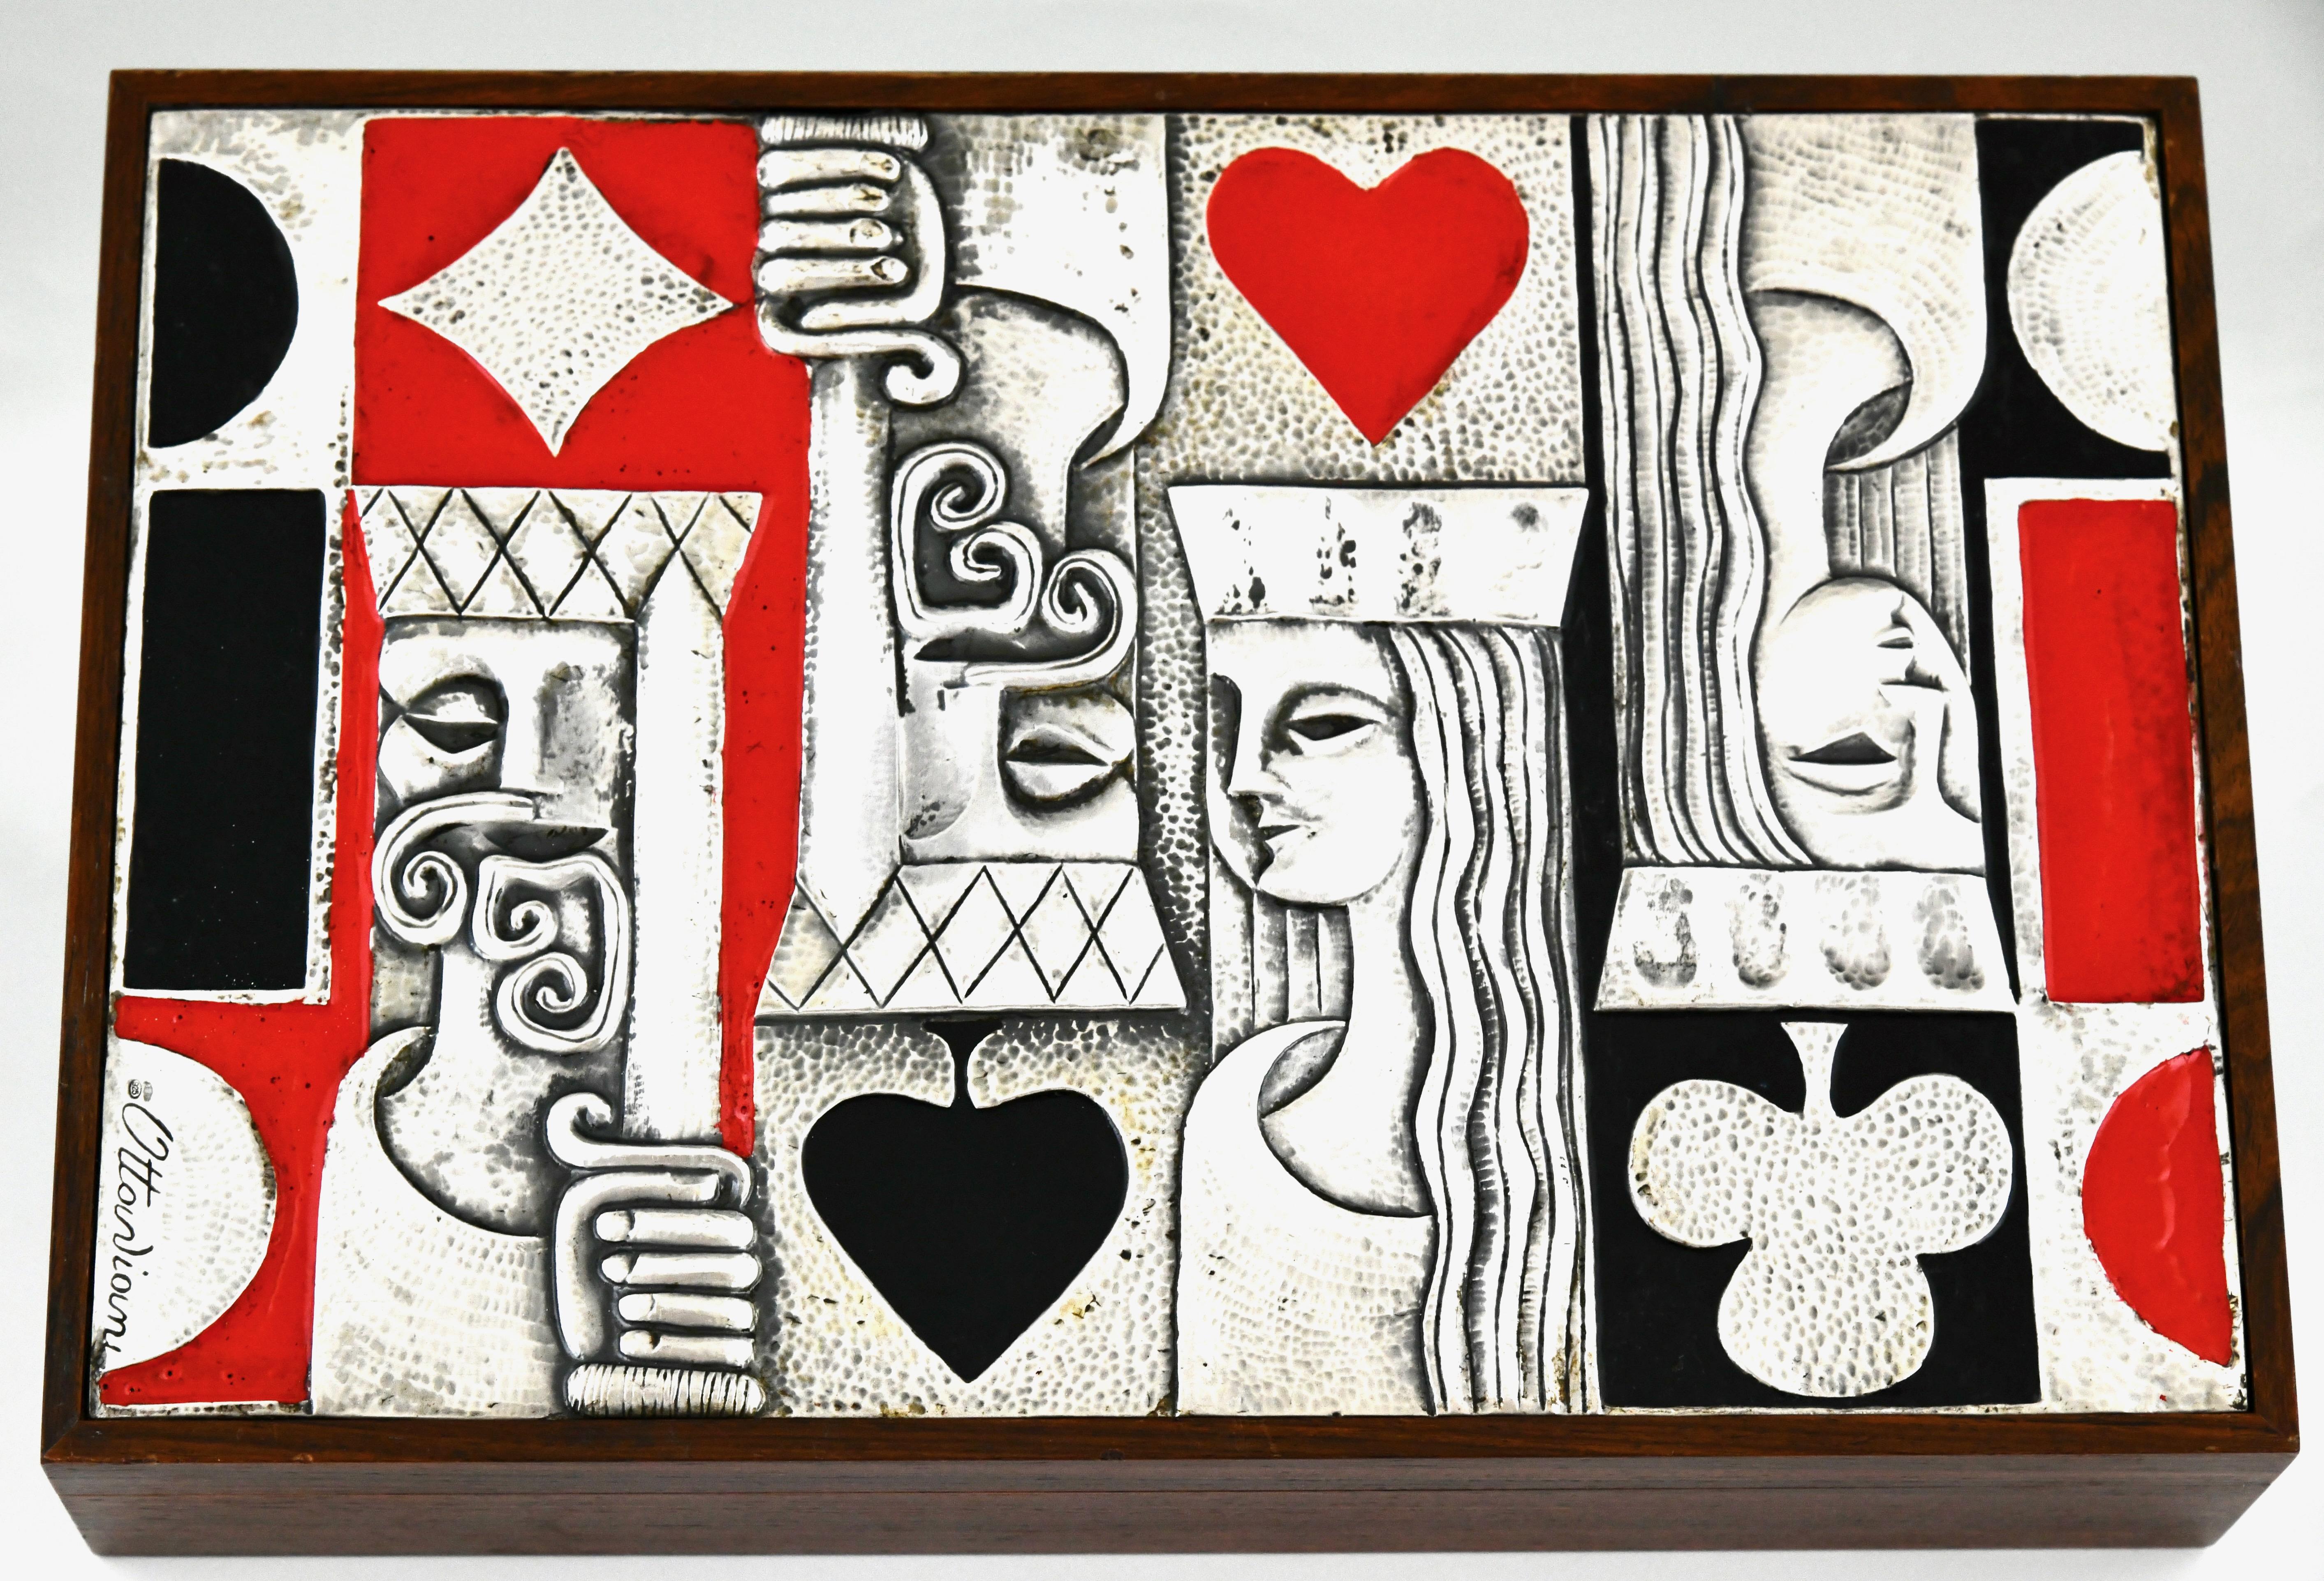 Mid Century Sterling silver enamel and wood playing card box, Italy 1979.
Signed Ottaviani, Sterling silver 925 mark. 
Complete set of playing cards, dice, cup and chips.

Ottaviani (1945) is a jewelry and silver firm located in the small seaside